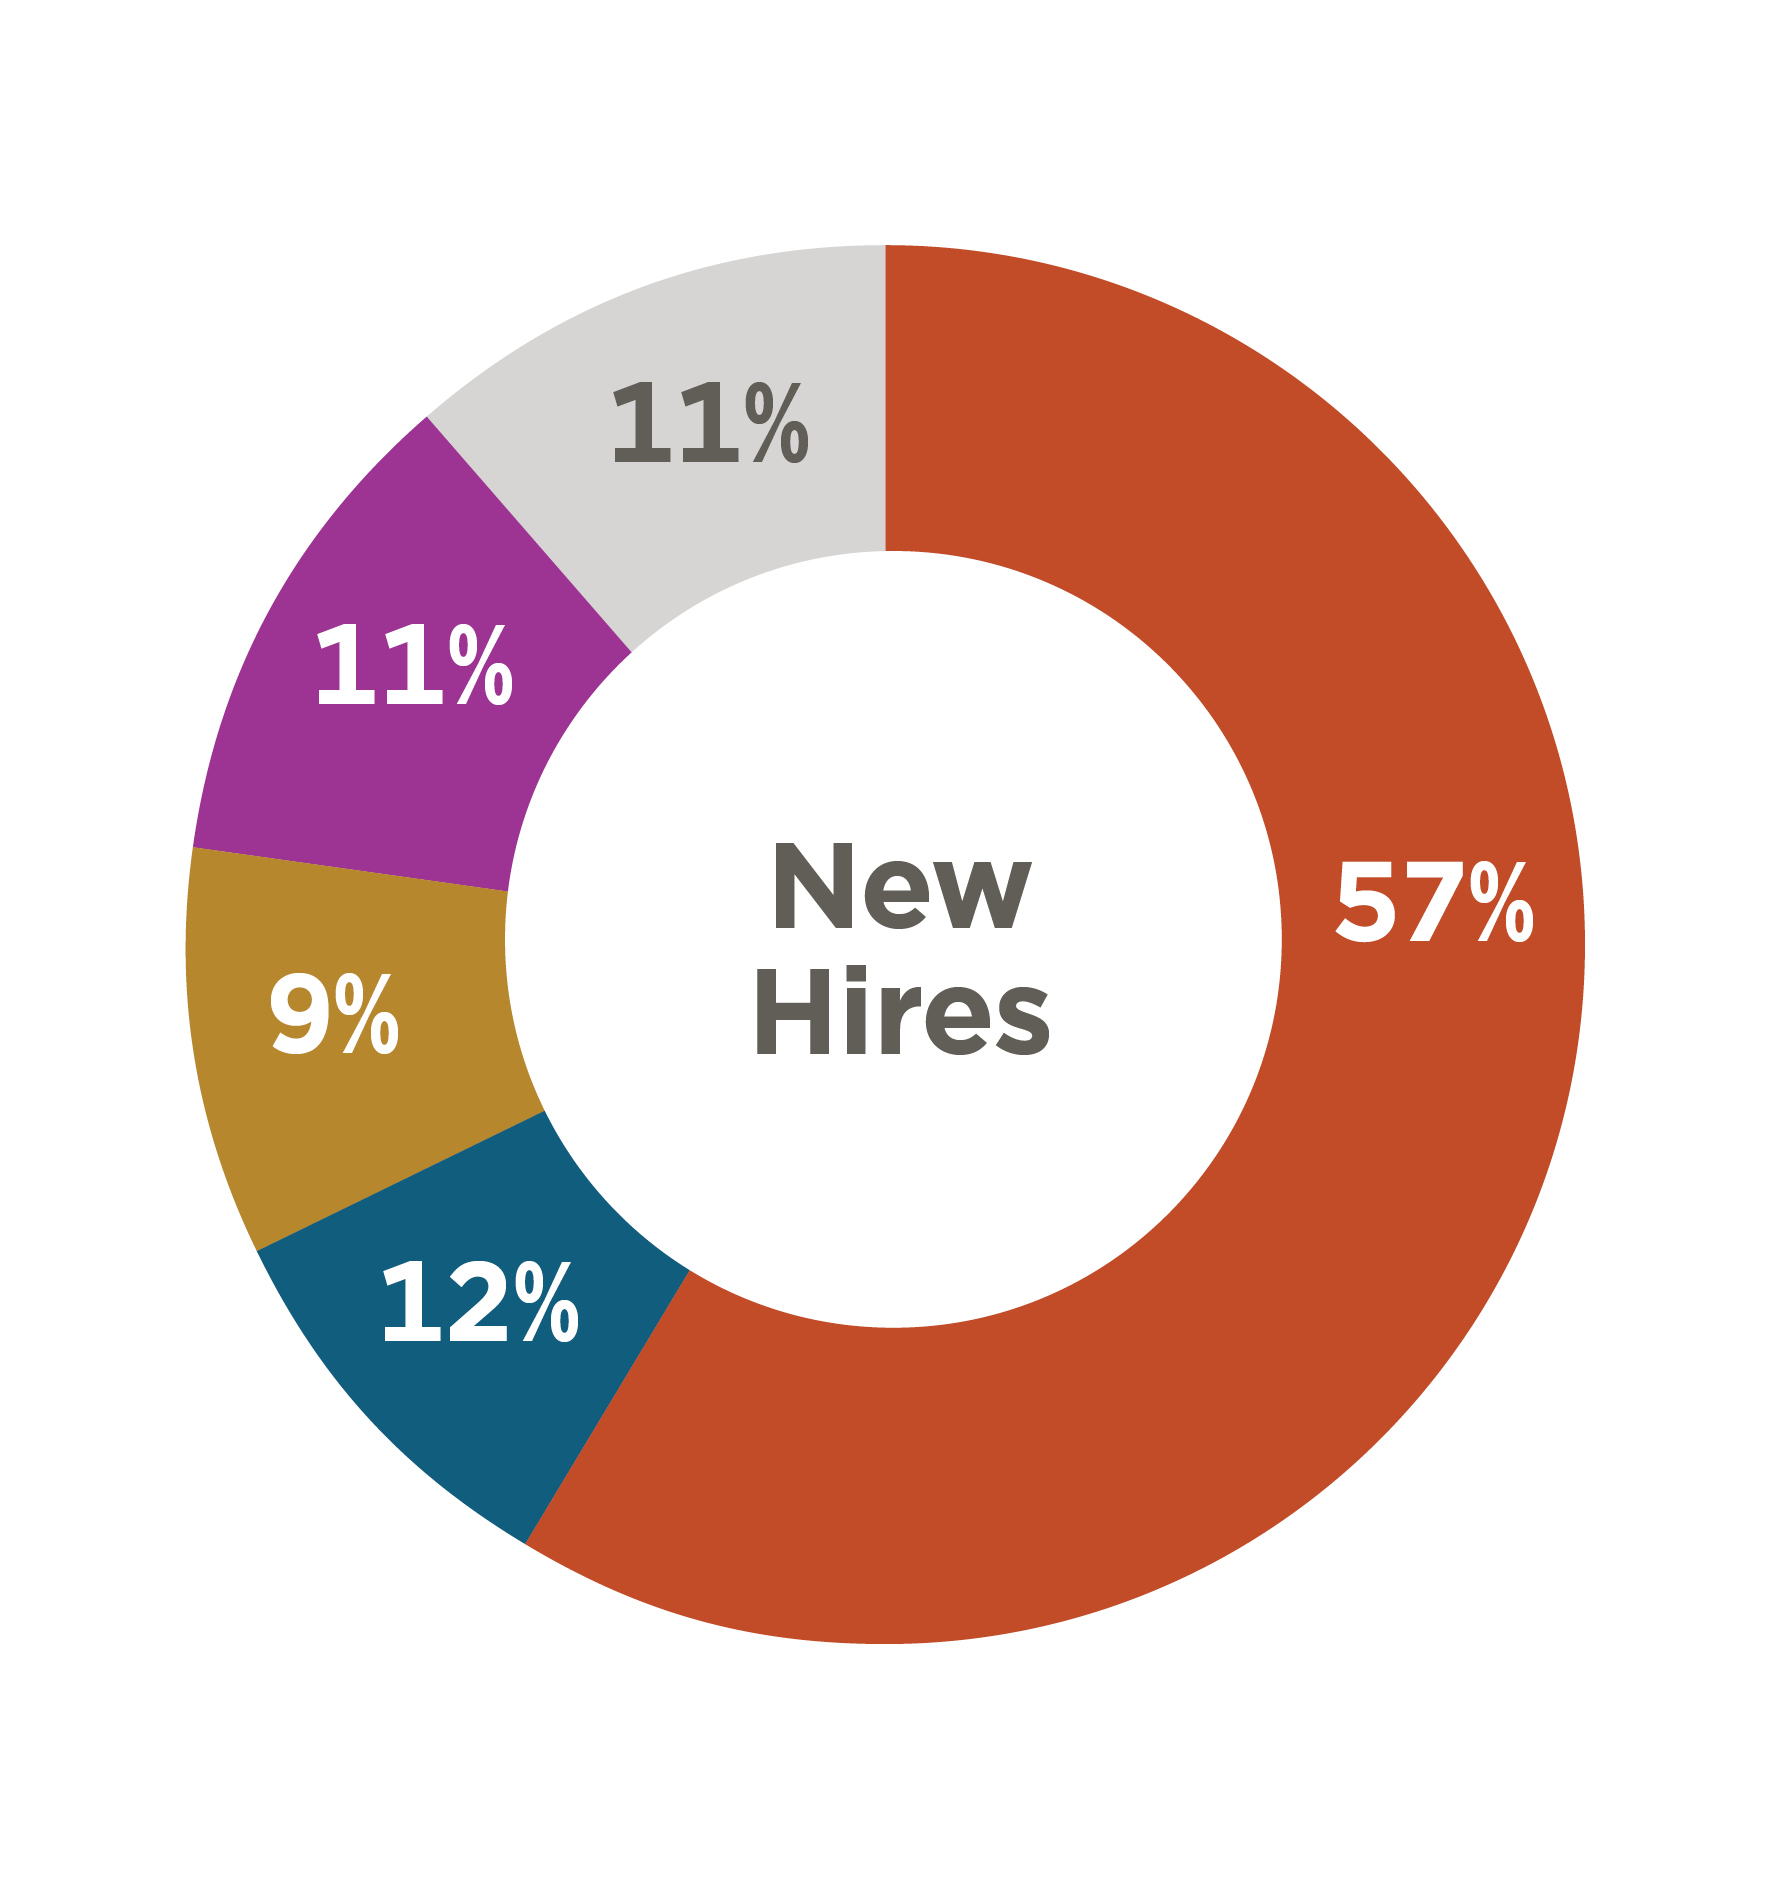 Pie Chart Showing New Hires Ethnic Diversity: 57% White, 12% Black or African American, 9% Asian, 11% Hispanic or Latino, 11% Other